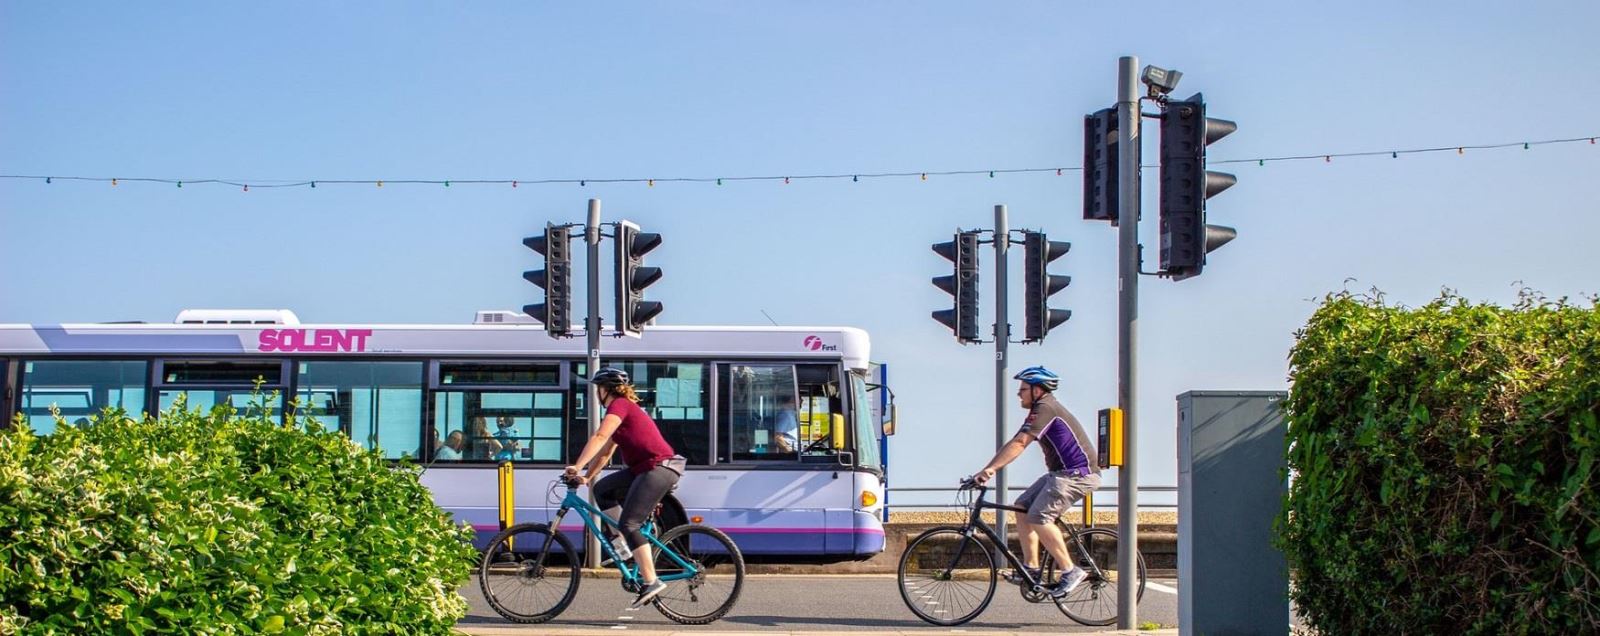 First bus driving along Southsea Seafront, with cyclists in the foreground